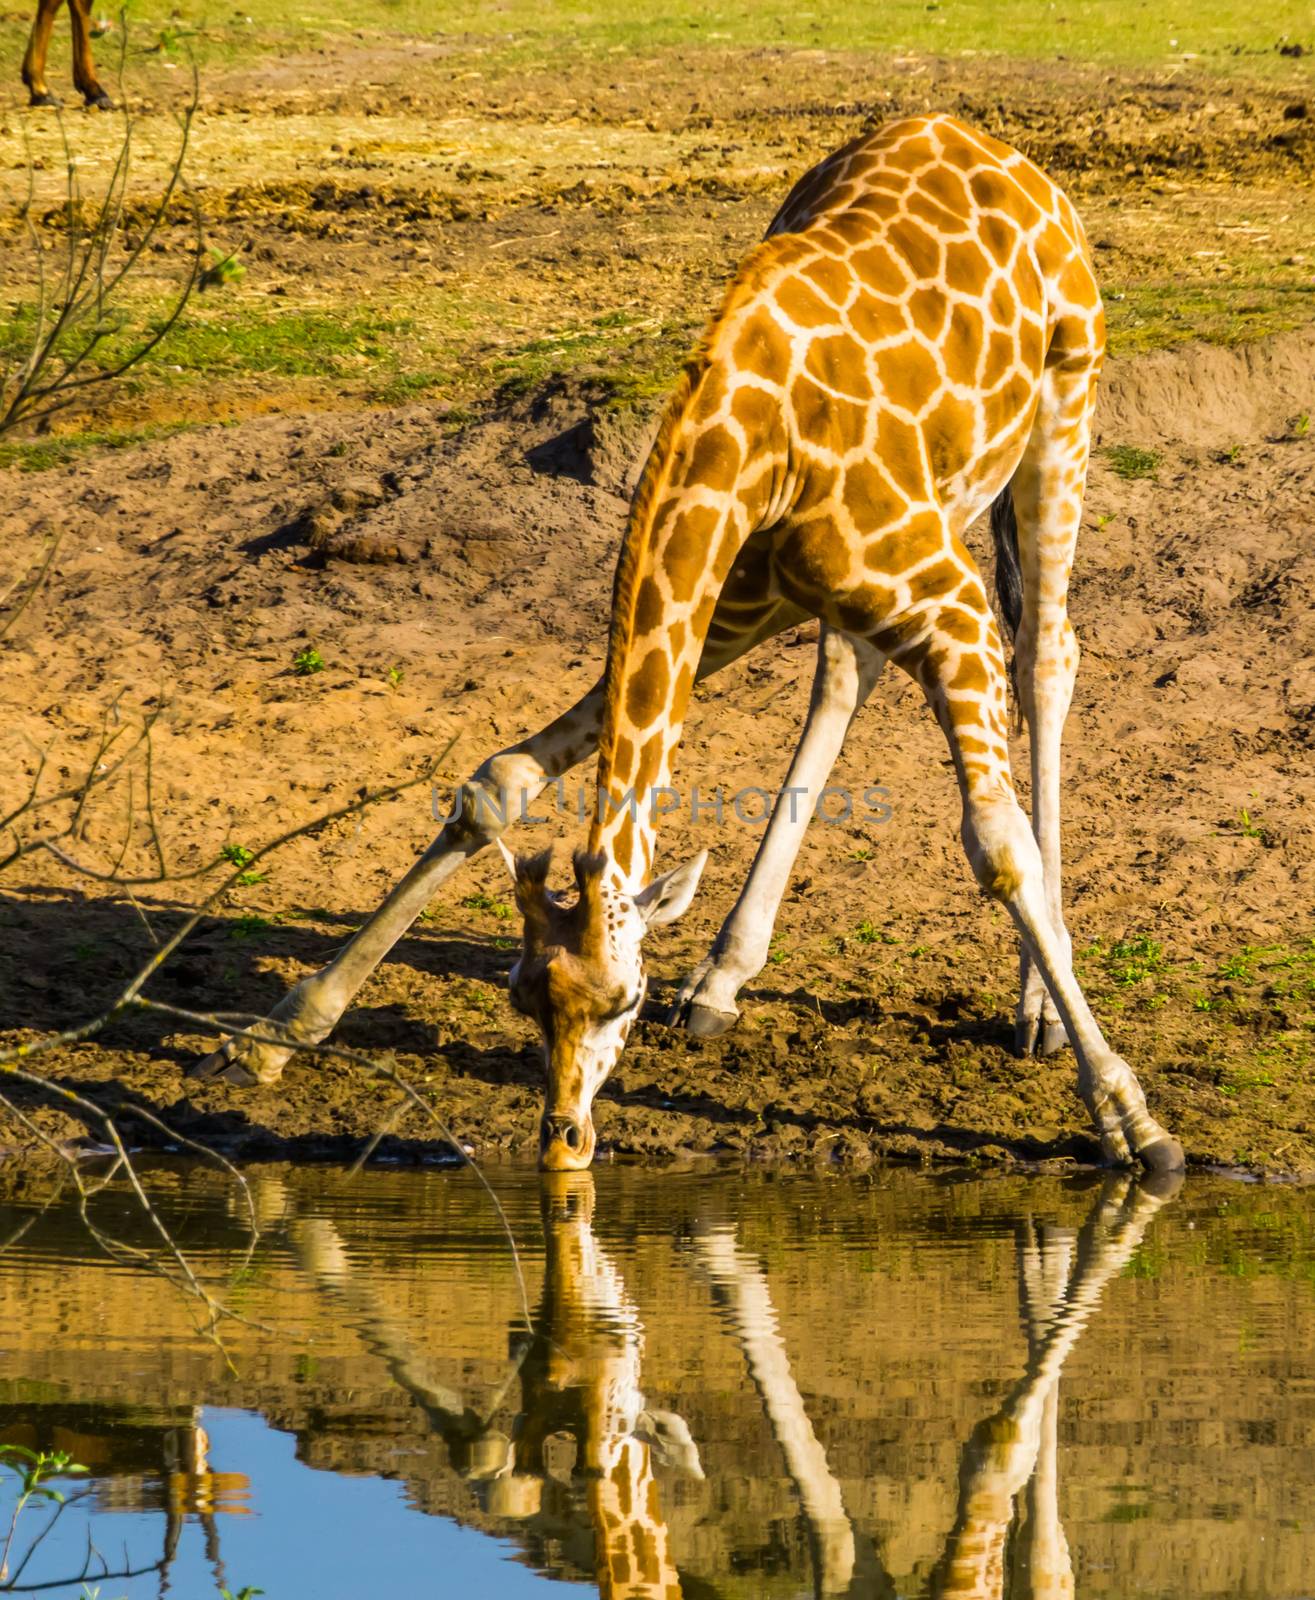 Nubian giraffe standing in a funny split pose while drinking water from the lake, Critically endangered animal specie from Africa by charlottebleijenberg